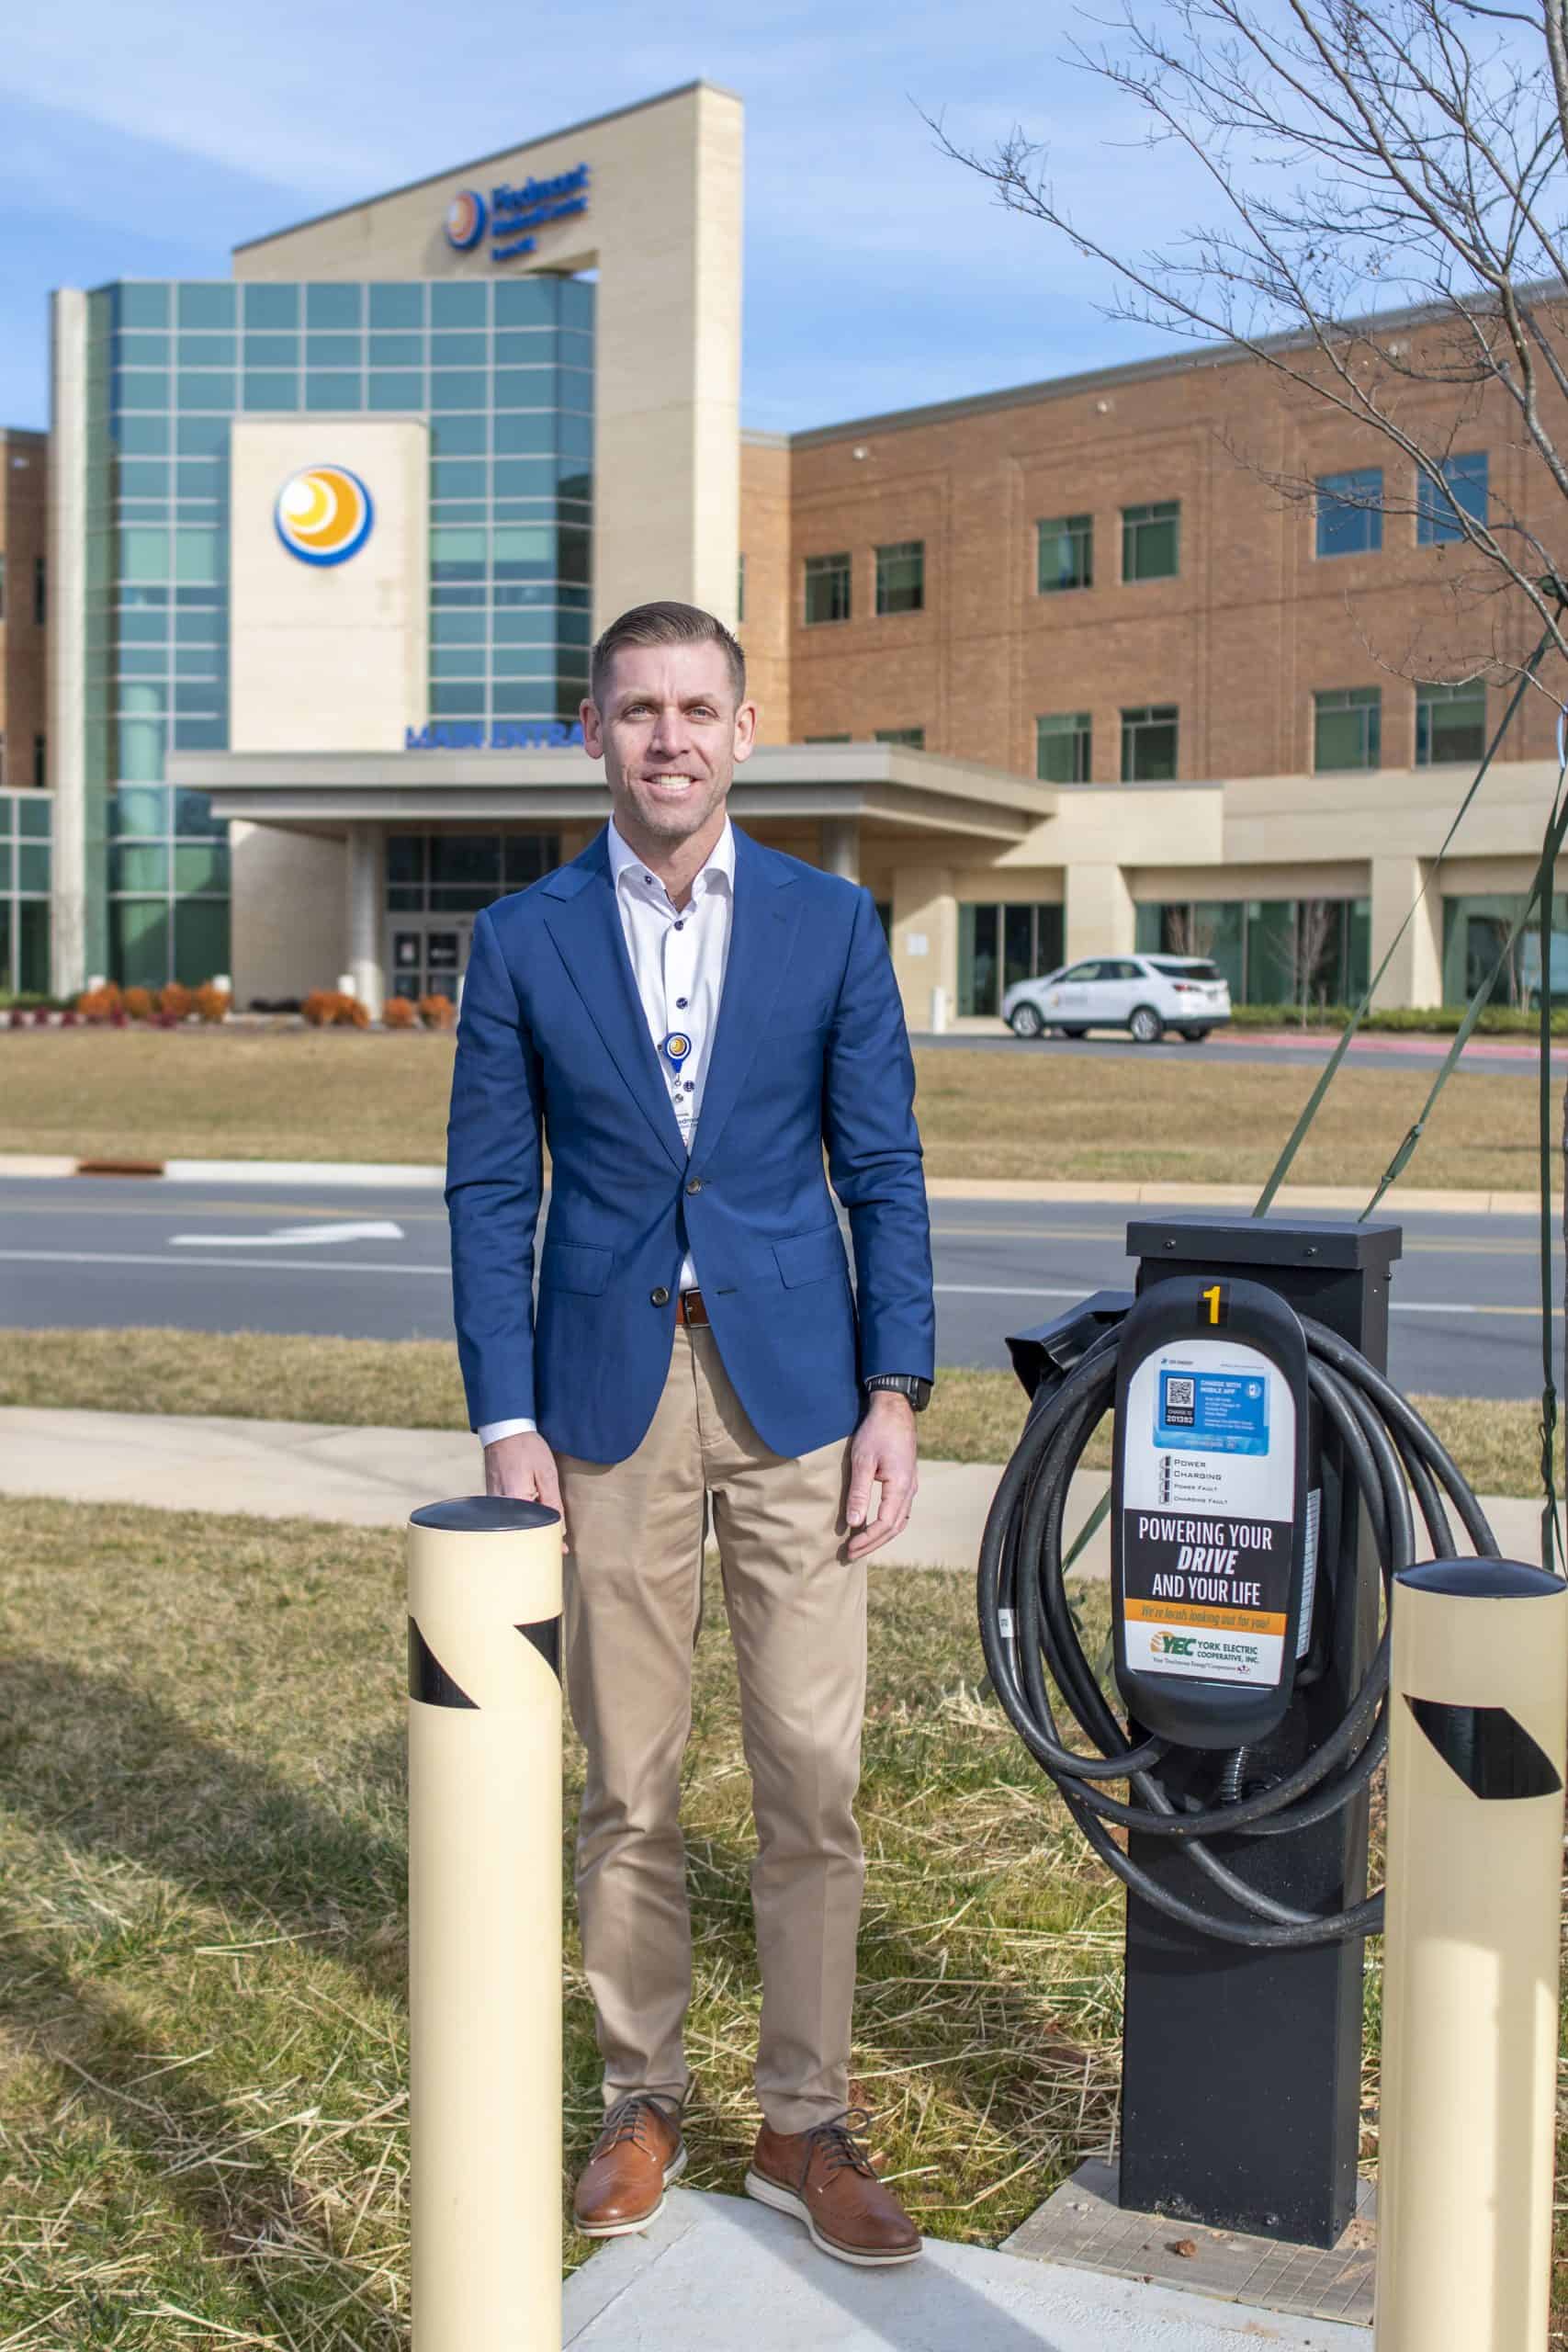 CEO Chris Mitchell stands with the YEC charging station Piedmont Medical Center